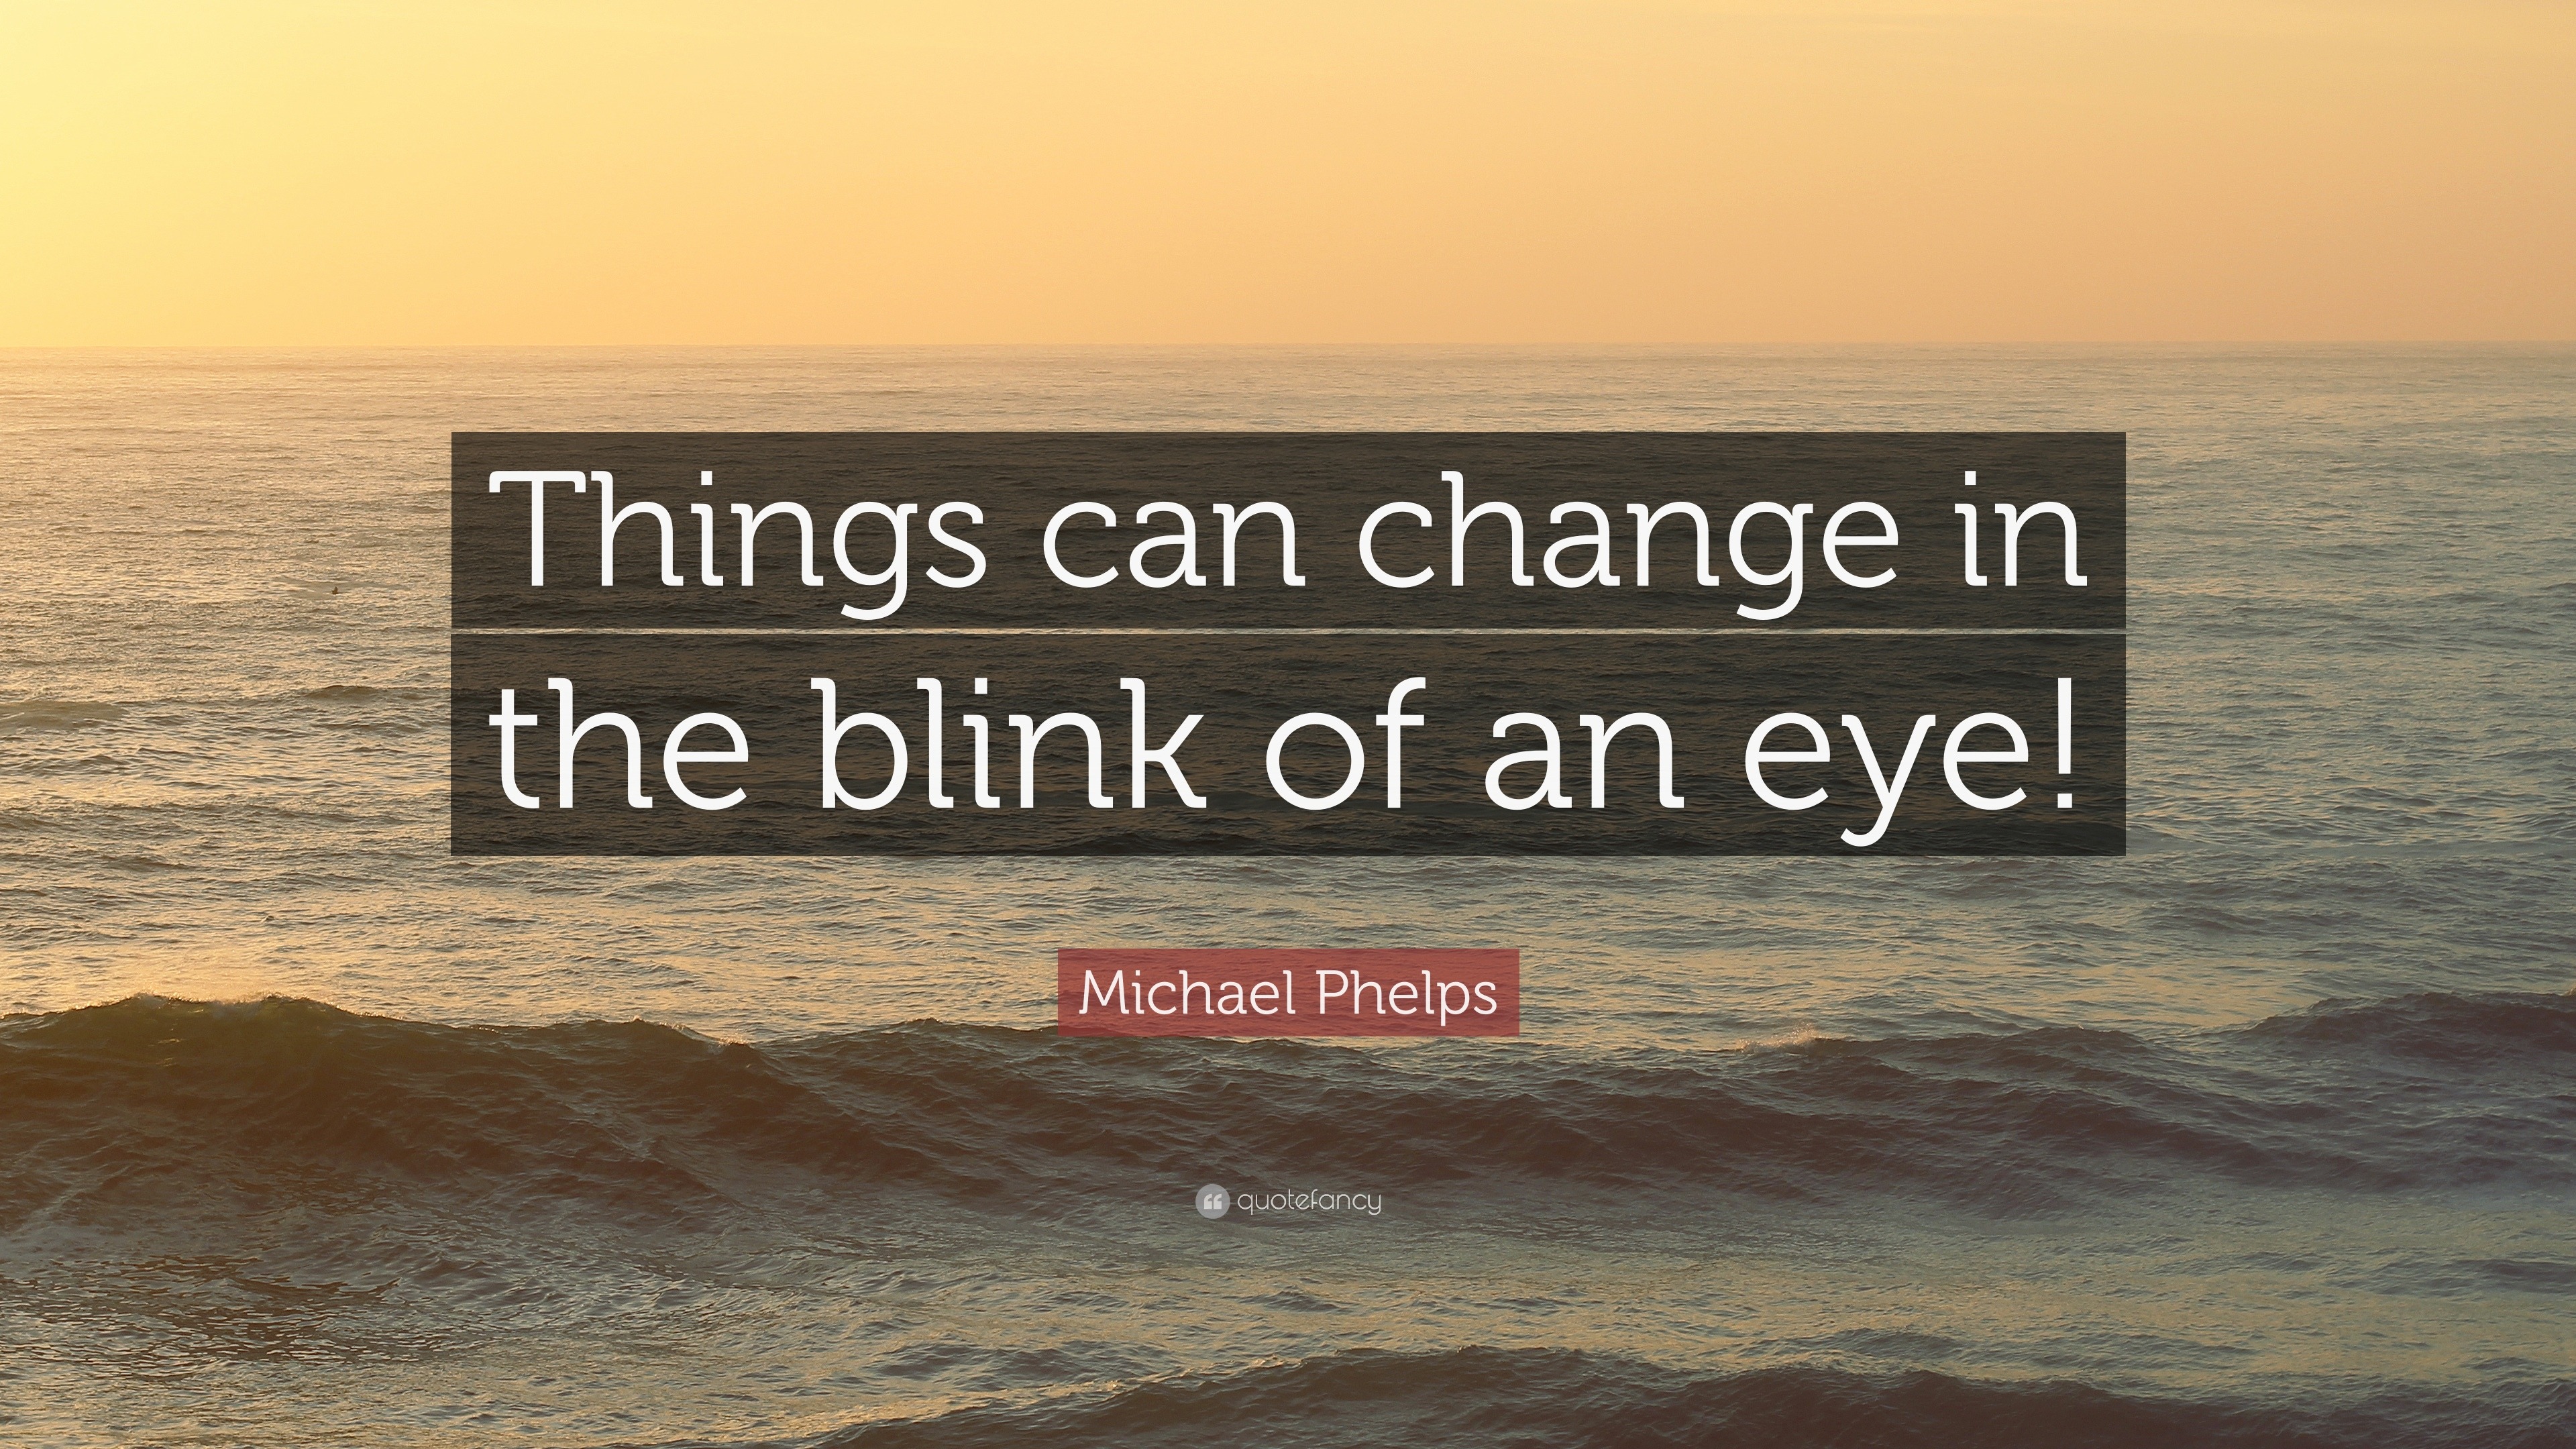 Michael Phelps Quote Things Can Change In The Blink Of An Eye 12 Wallpapers Quotefancy